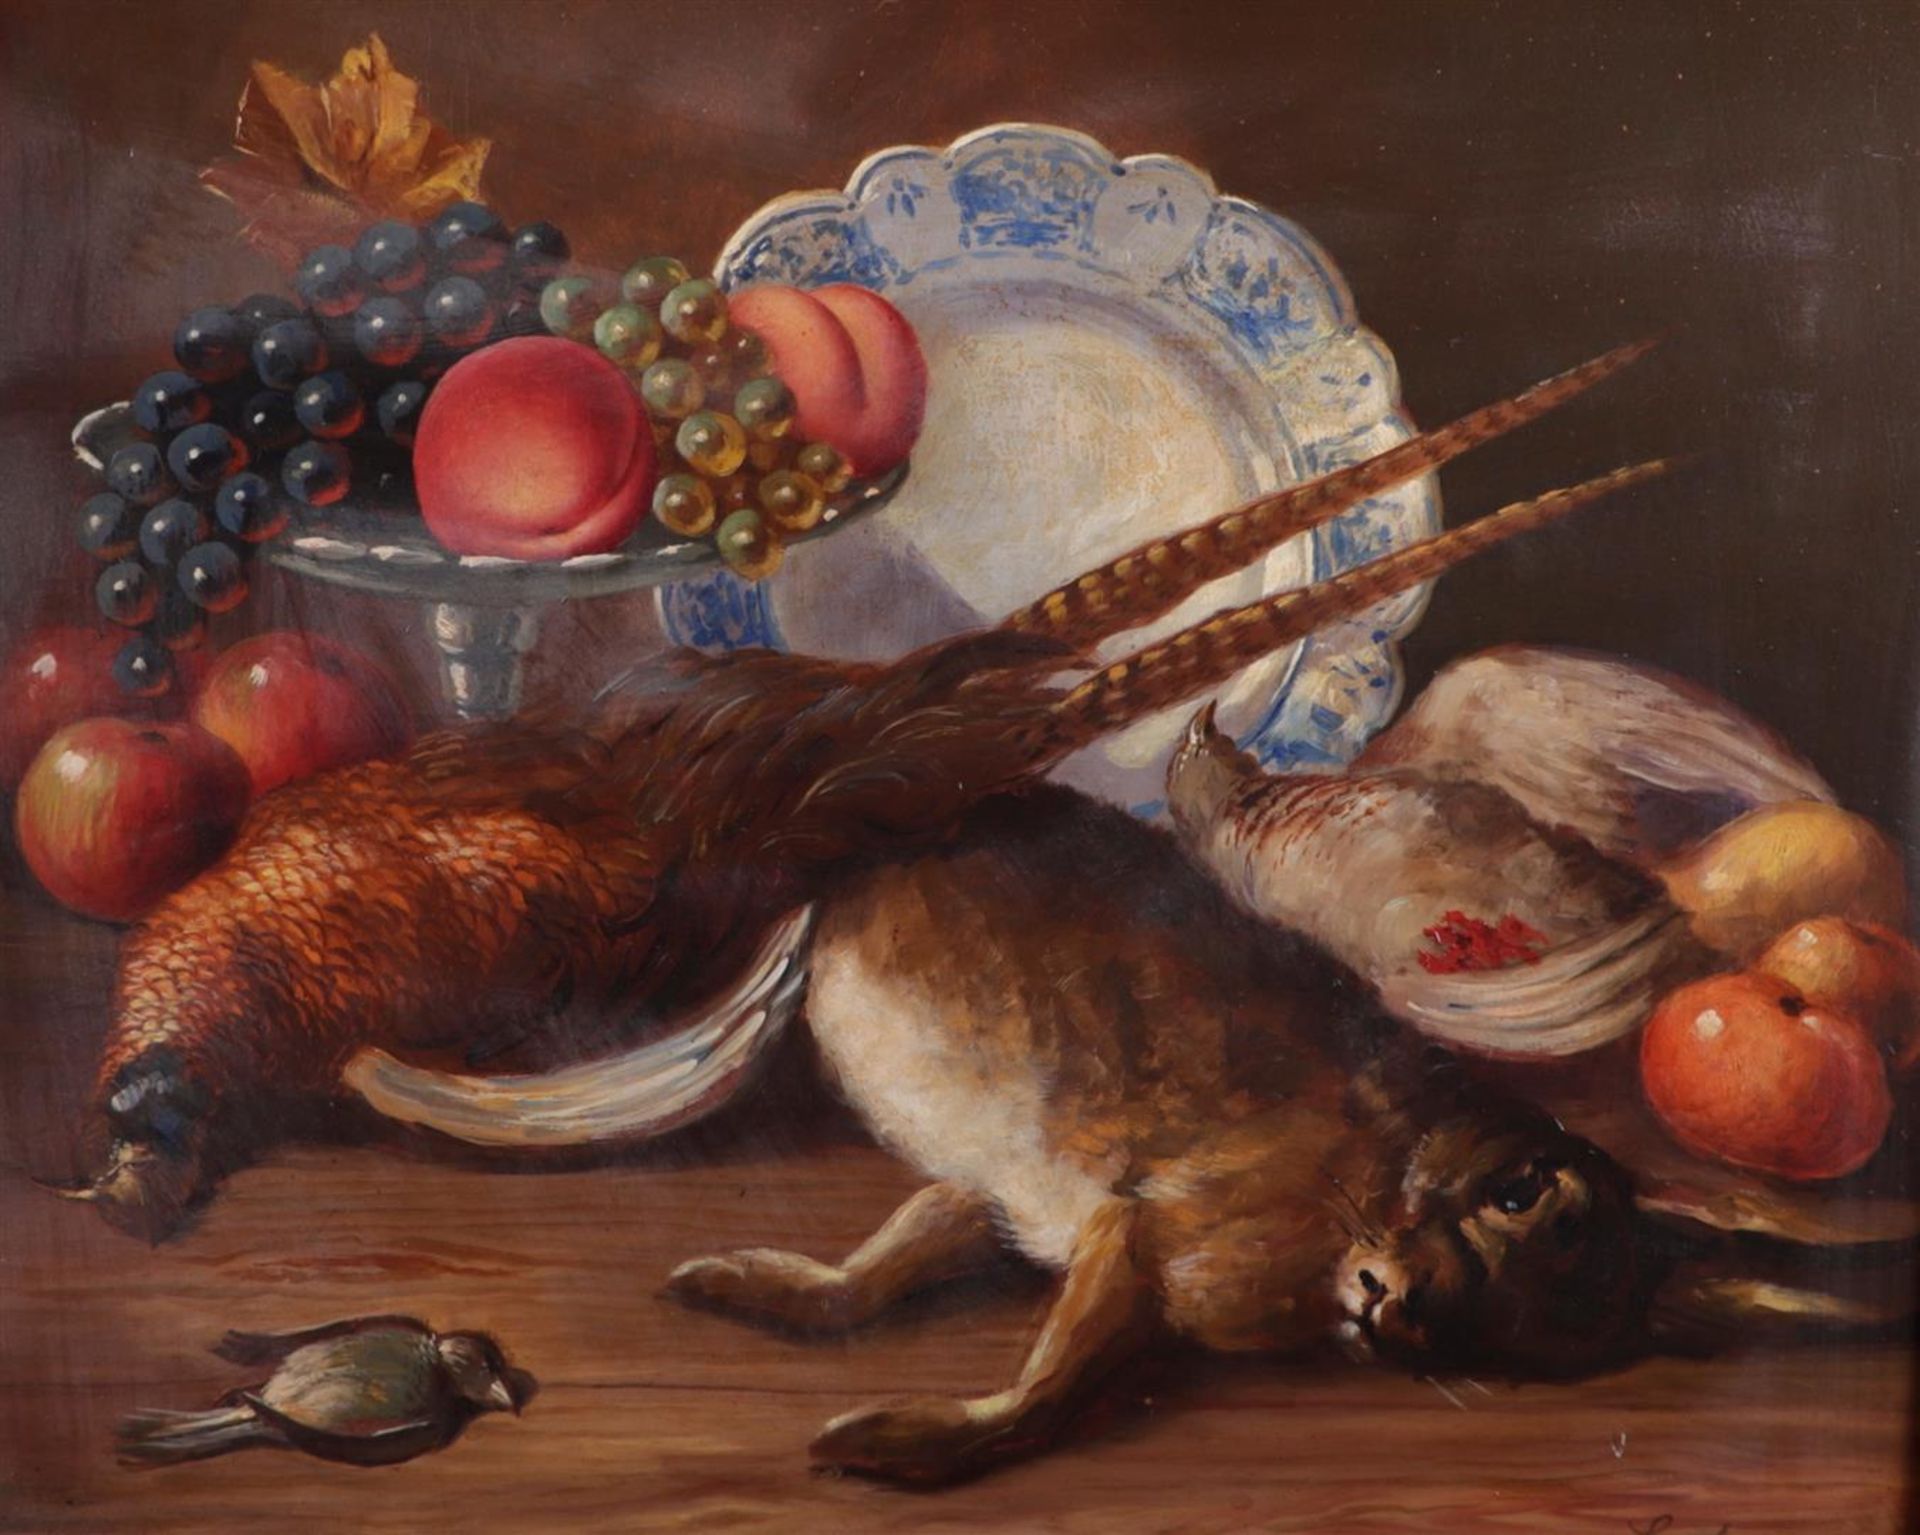 Belgian School, 20th century, Hunting still life, unclearly signed (lower right), oil on board,
55 x